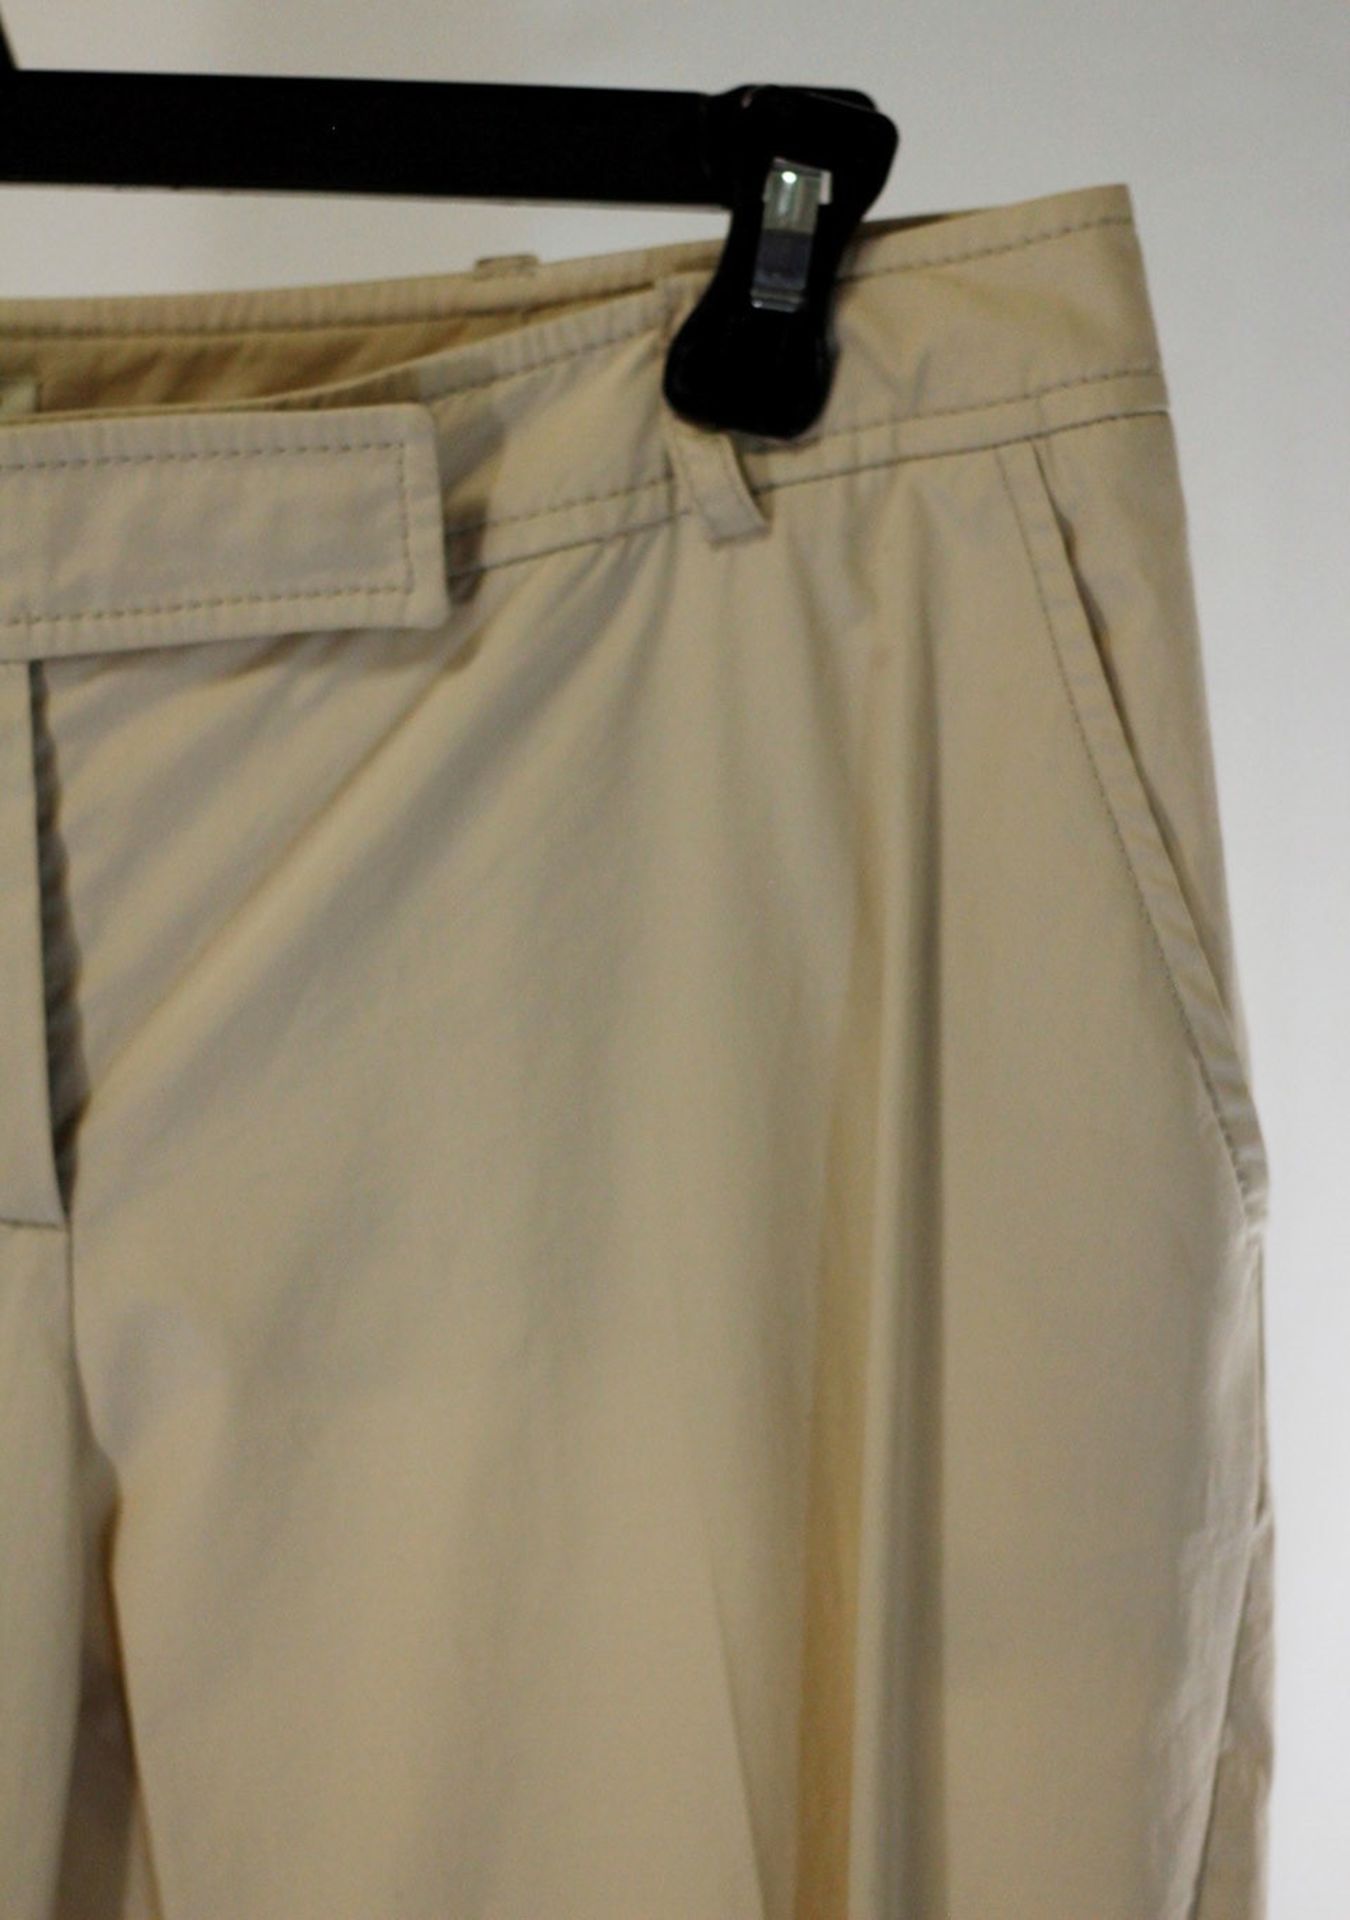 1 x Agnona Beige Trousers - Size: 14 - Material: 97% Cotton, 3% Elastane. Lining 100% Cupro - From a - Image 8 of 8